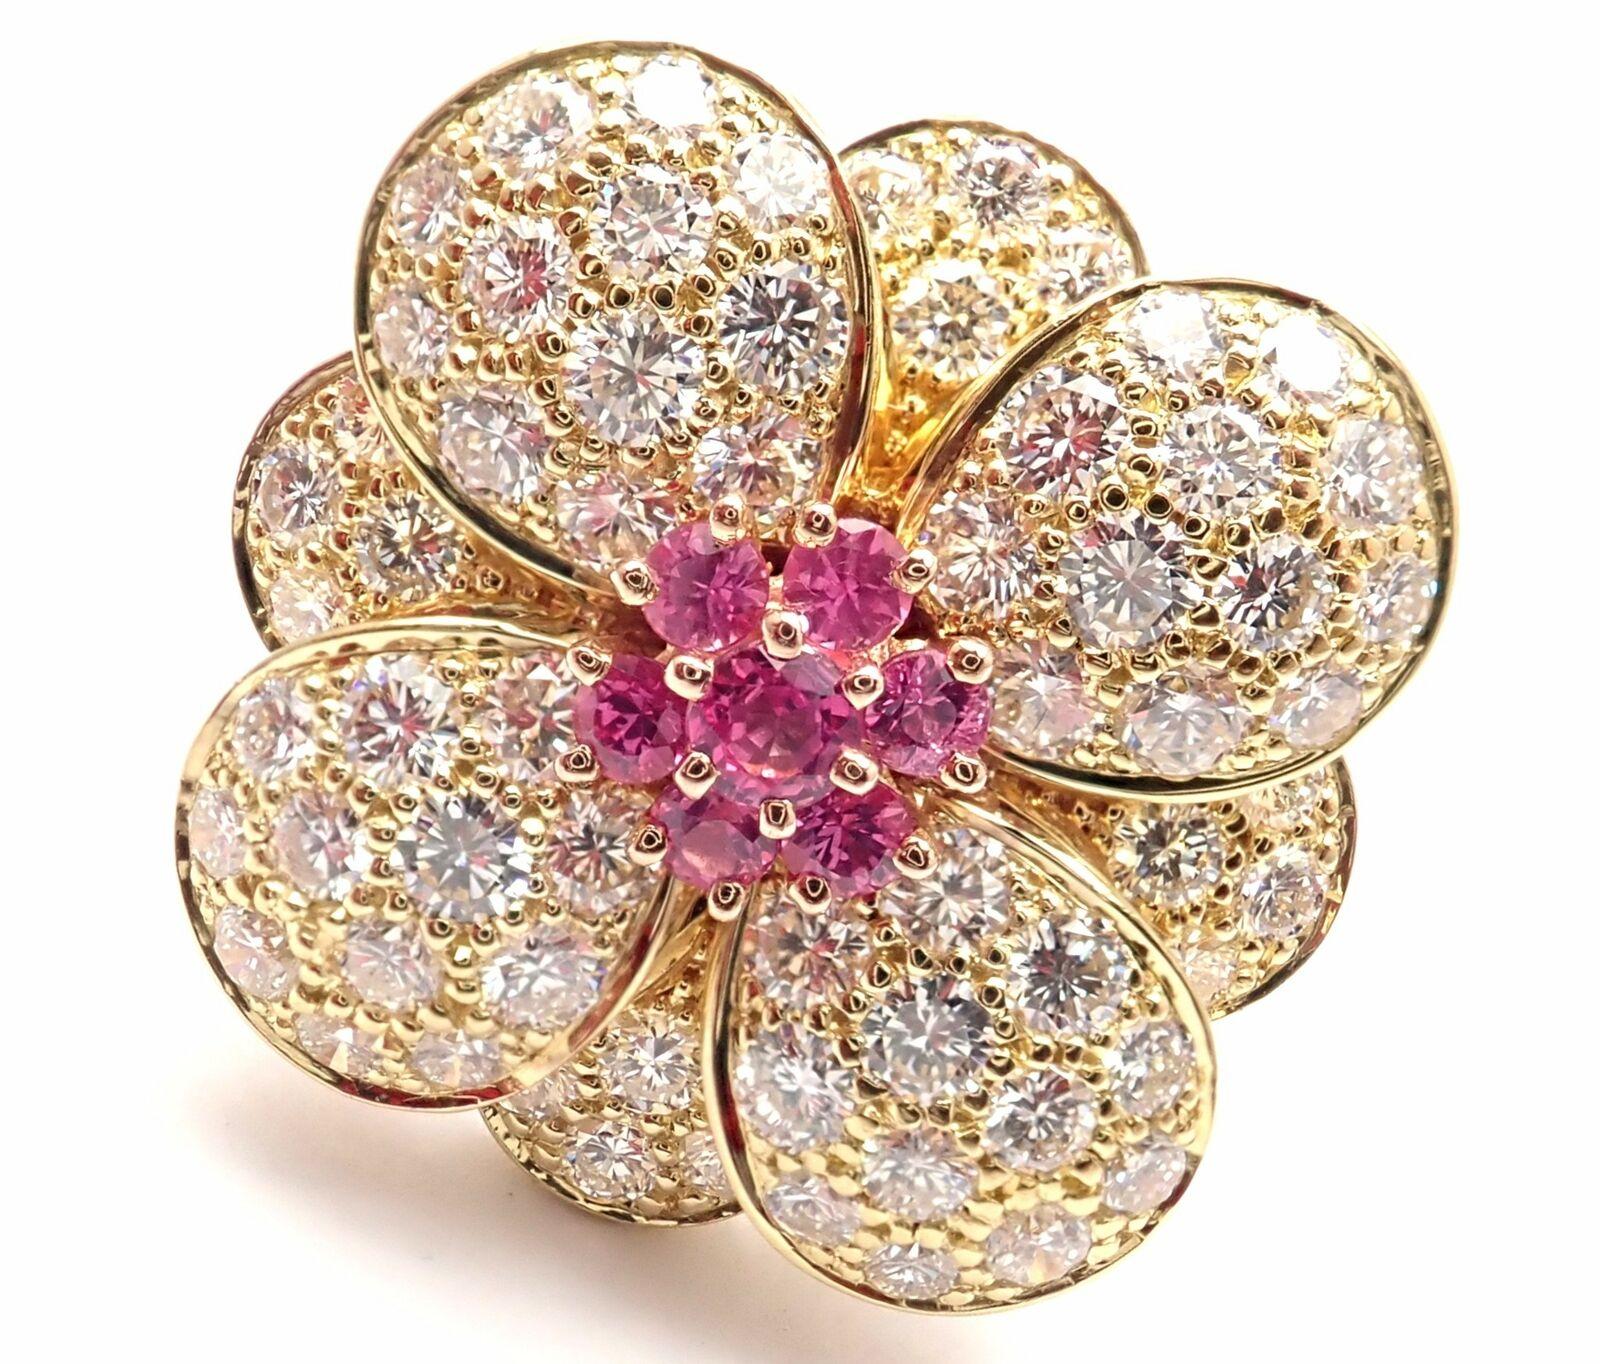 18k Rose Gold Diamond And Pink Sapphire Flower Ring by Van Cleef & Arpels.
With brilliant cut diamonds VVS1 clarity, E color and 7 round pink sapphires.
This ring comes with Van Cleef & Arpels box and Van Cleef & Arpels service paper.
Details:
Size: